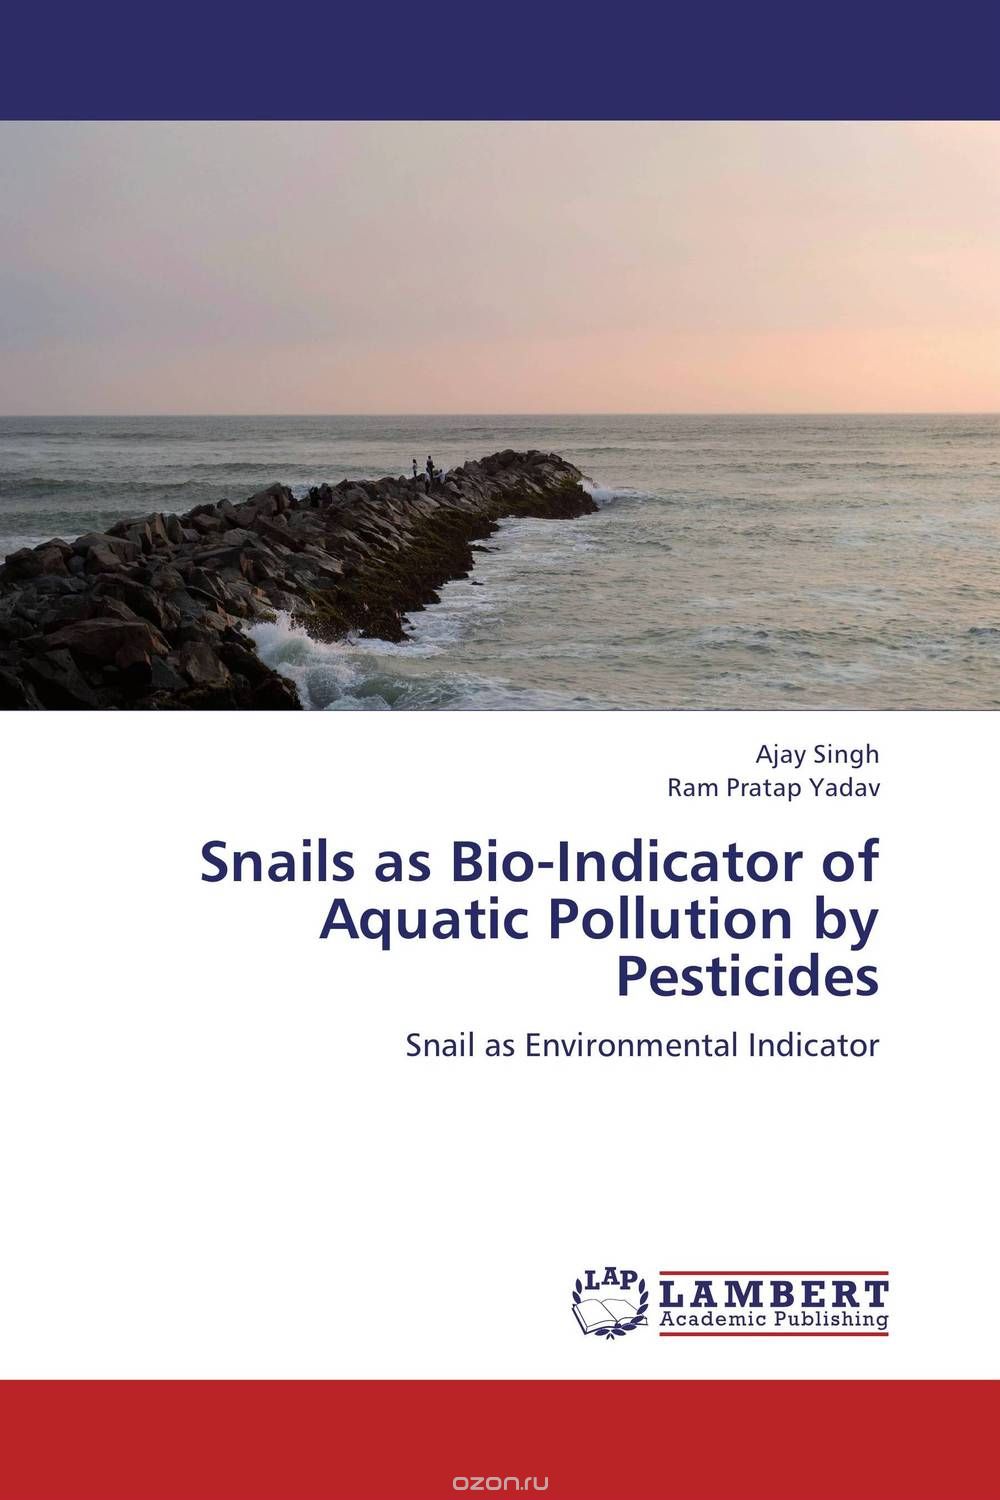 Snails as Bio-Indicator of Aquatic Pollution by Pesticides